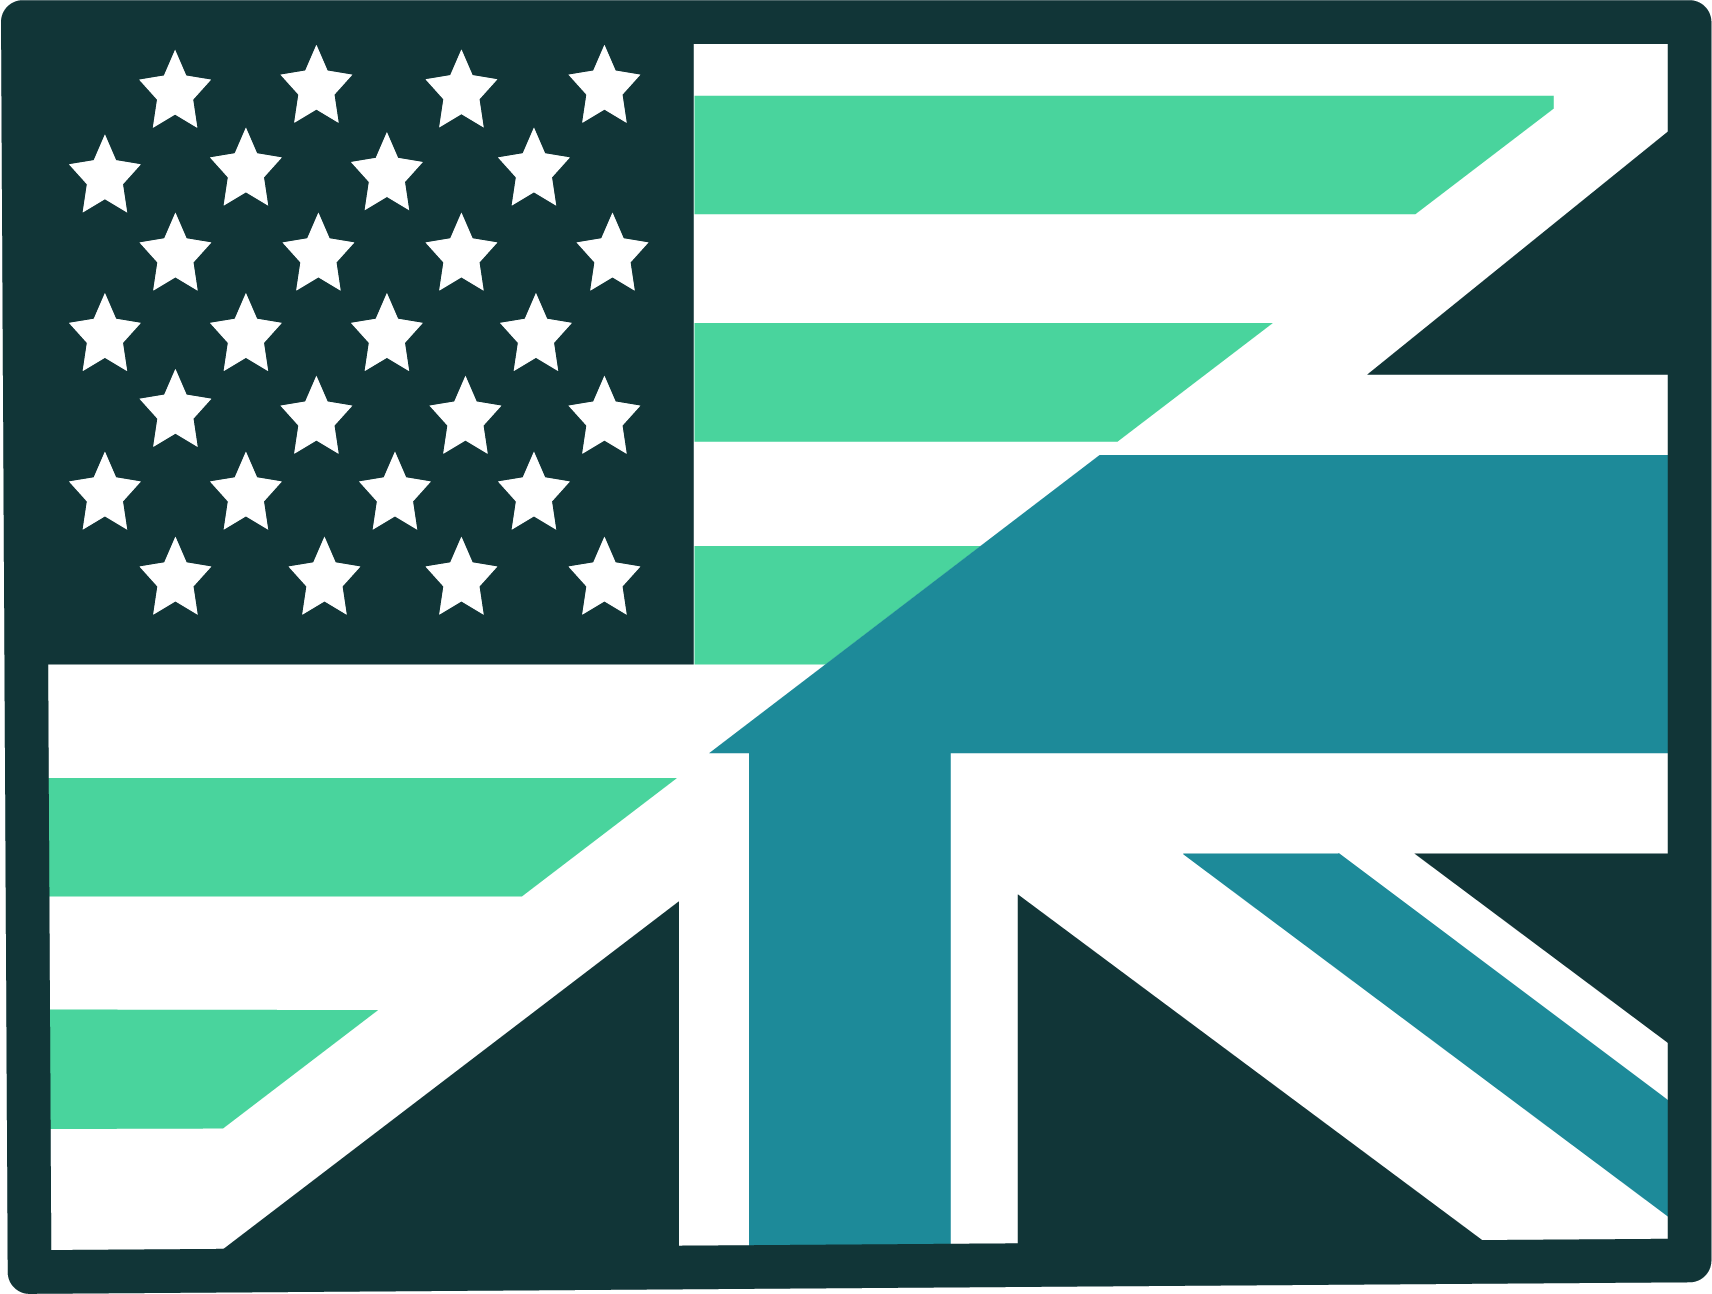 Tax implications for Americans in the UK